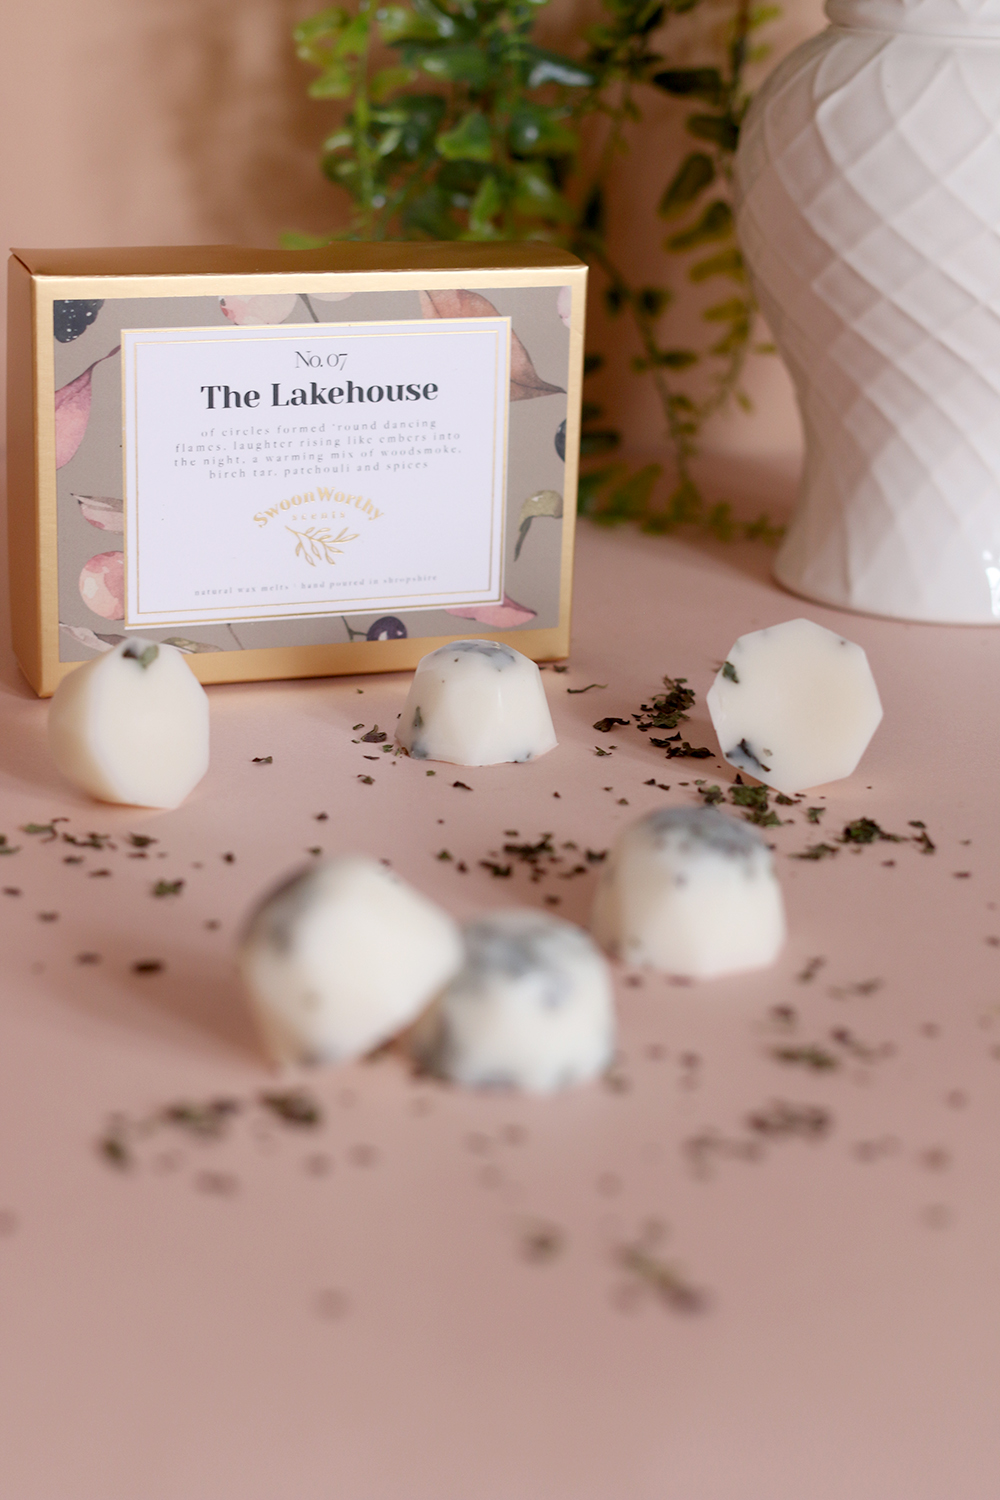 The Lakehouse woodsmoke and birch tar scented wax melts